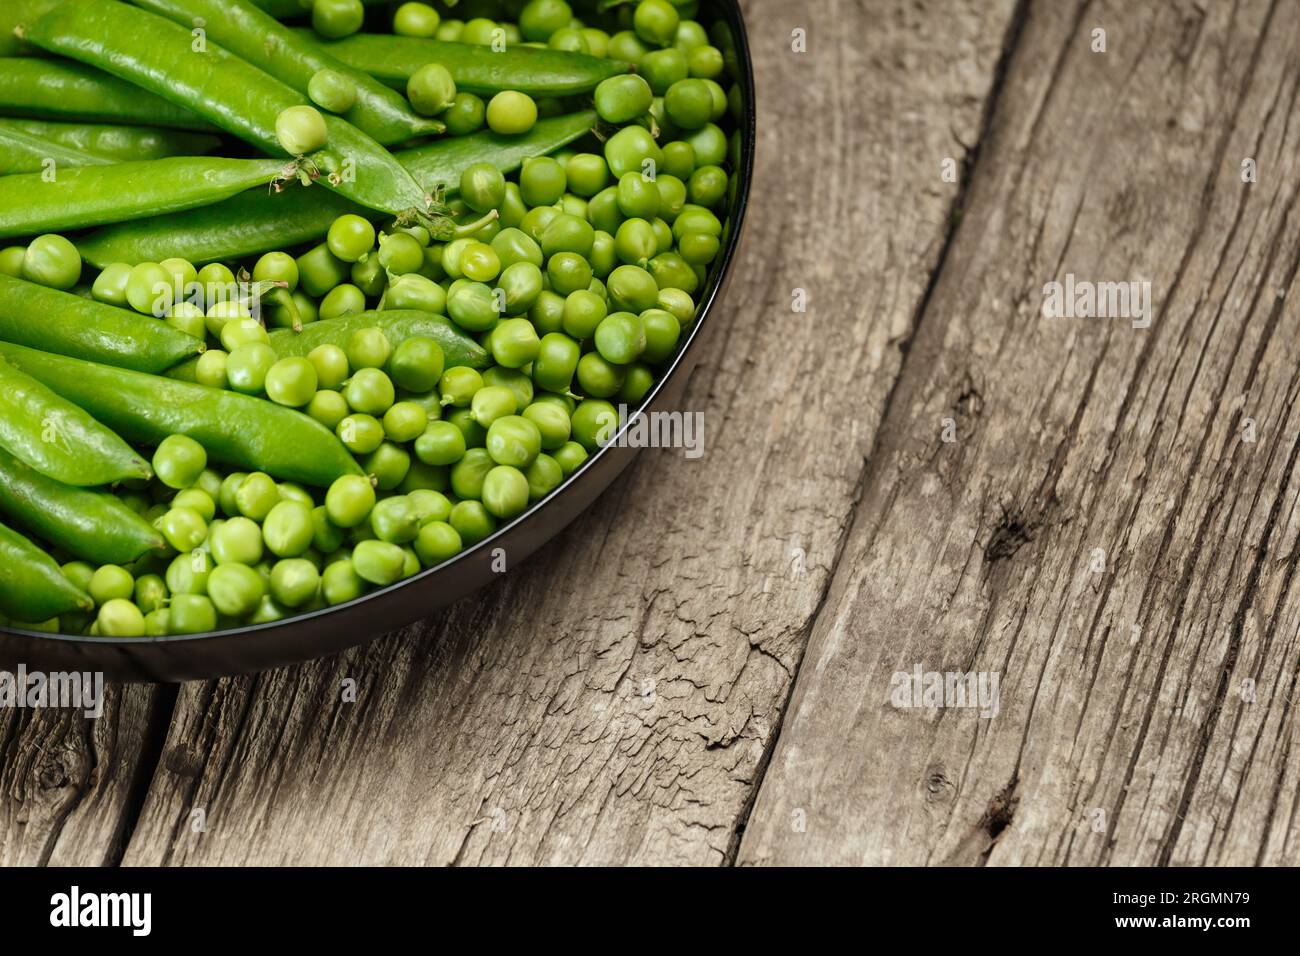 Green pea pods and shelled organic fresh peas in a round black plate on an aged wooden background, copy space. Vegetable protein, healthy products. Stock Photo